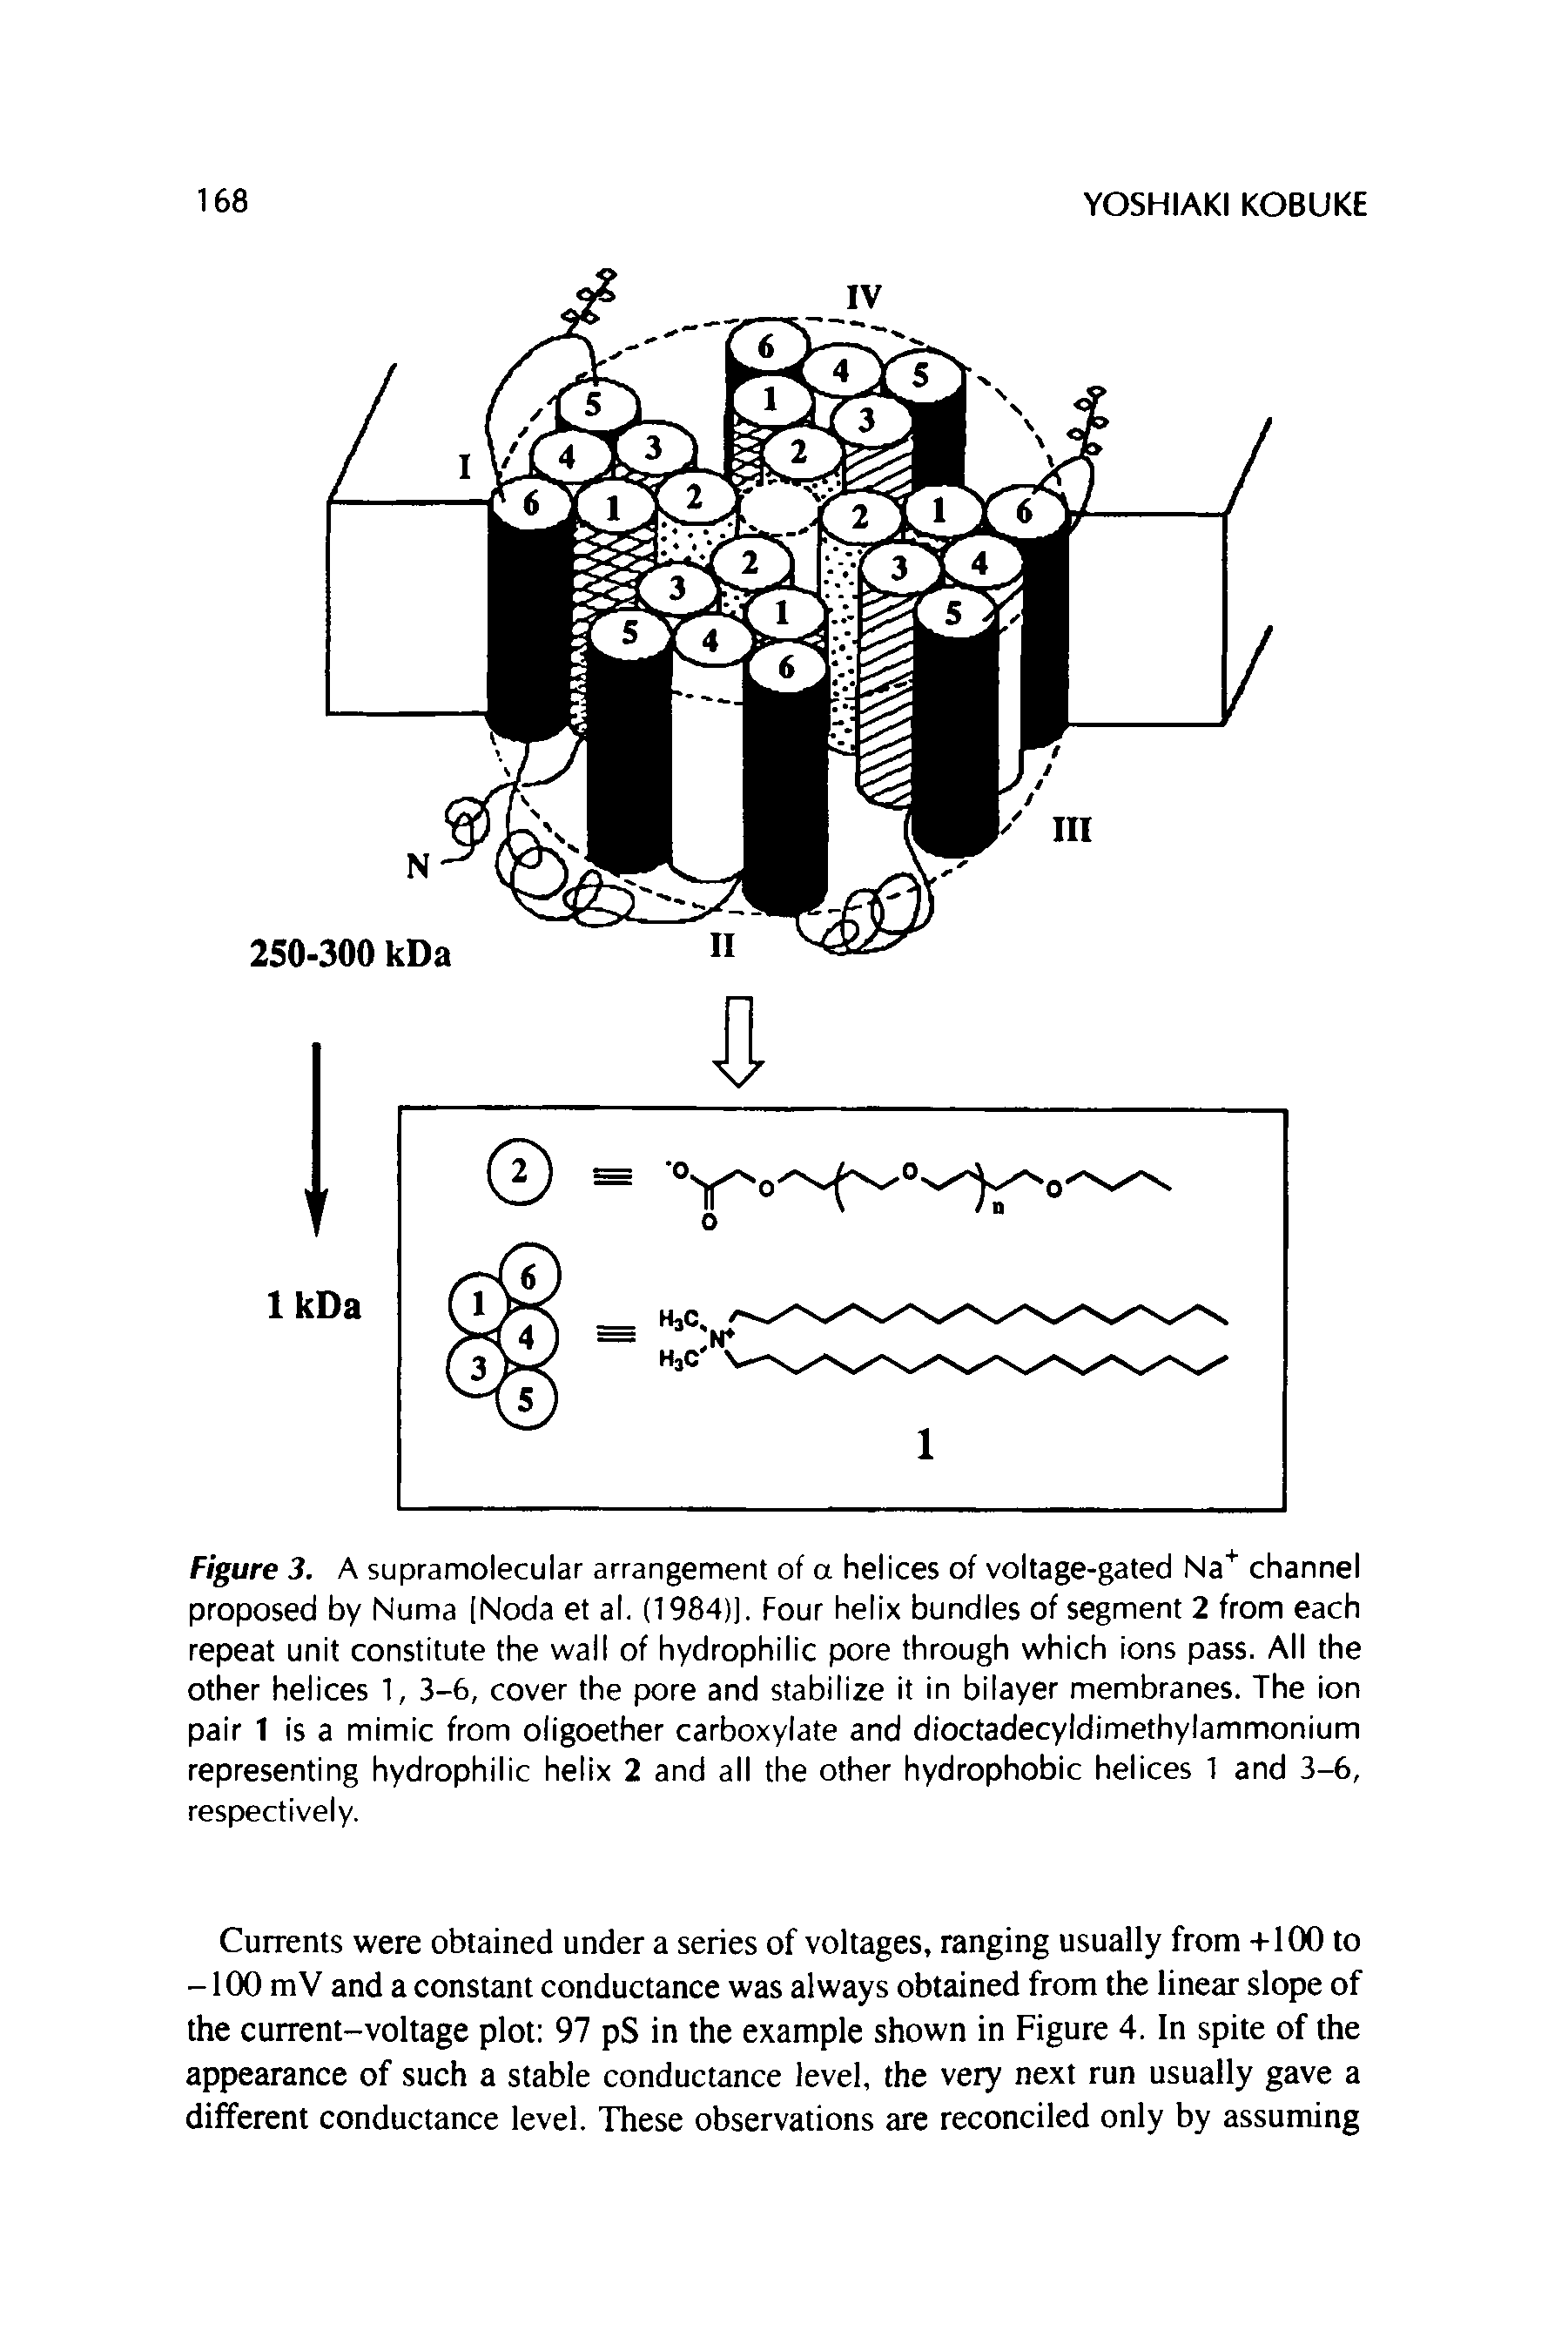 Figure 3. A supramolecular arrangement of a helices of voltage-gated Na" channel proposed by Numa [Noda et al. (1984)). Four helix bundles of segment 2 from each repeat unit constitute the wall of hydrophilic pore through which ions pass. All the other helices 1, 3-6, cover the pore and stabilize it in bilayer membranes. The ion pair 1 is a mimic from oligoether carboxylate and dioctadecyidimethylammonium representing hydrophilic helix 2 and all the other hydrophobic helices 1 and 3-6, respectively.